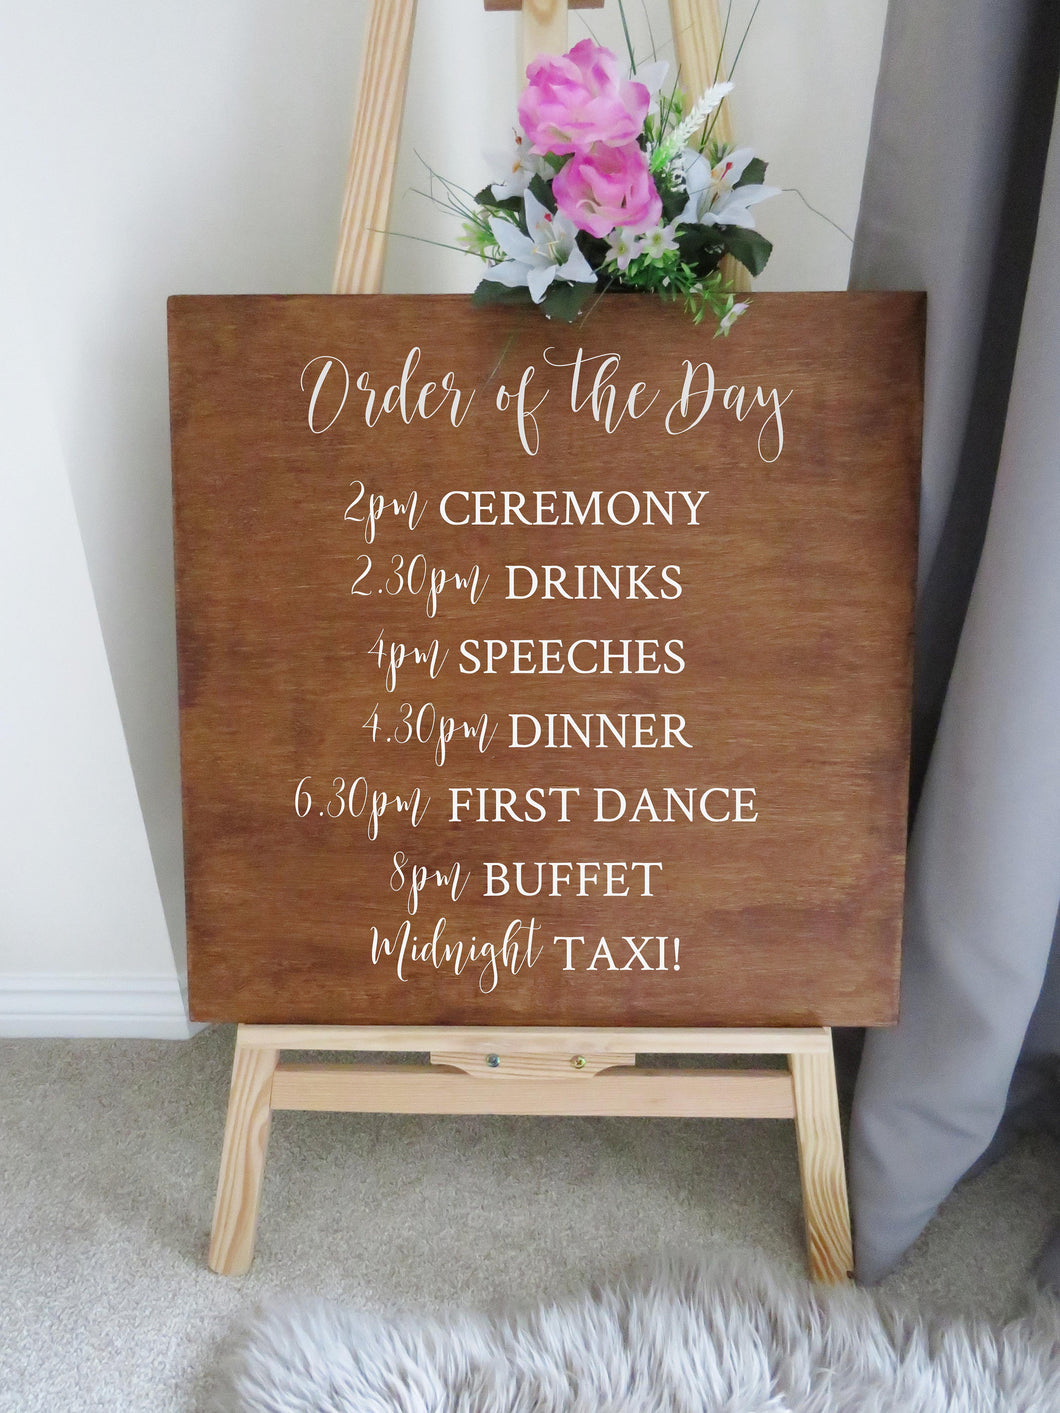 Vinyl Decal Sticker A2 Order of the Day // Easy to Apply Wedding Sign DIY // Ceremony Signage